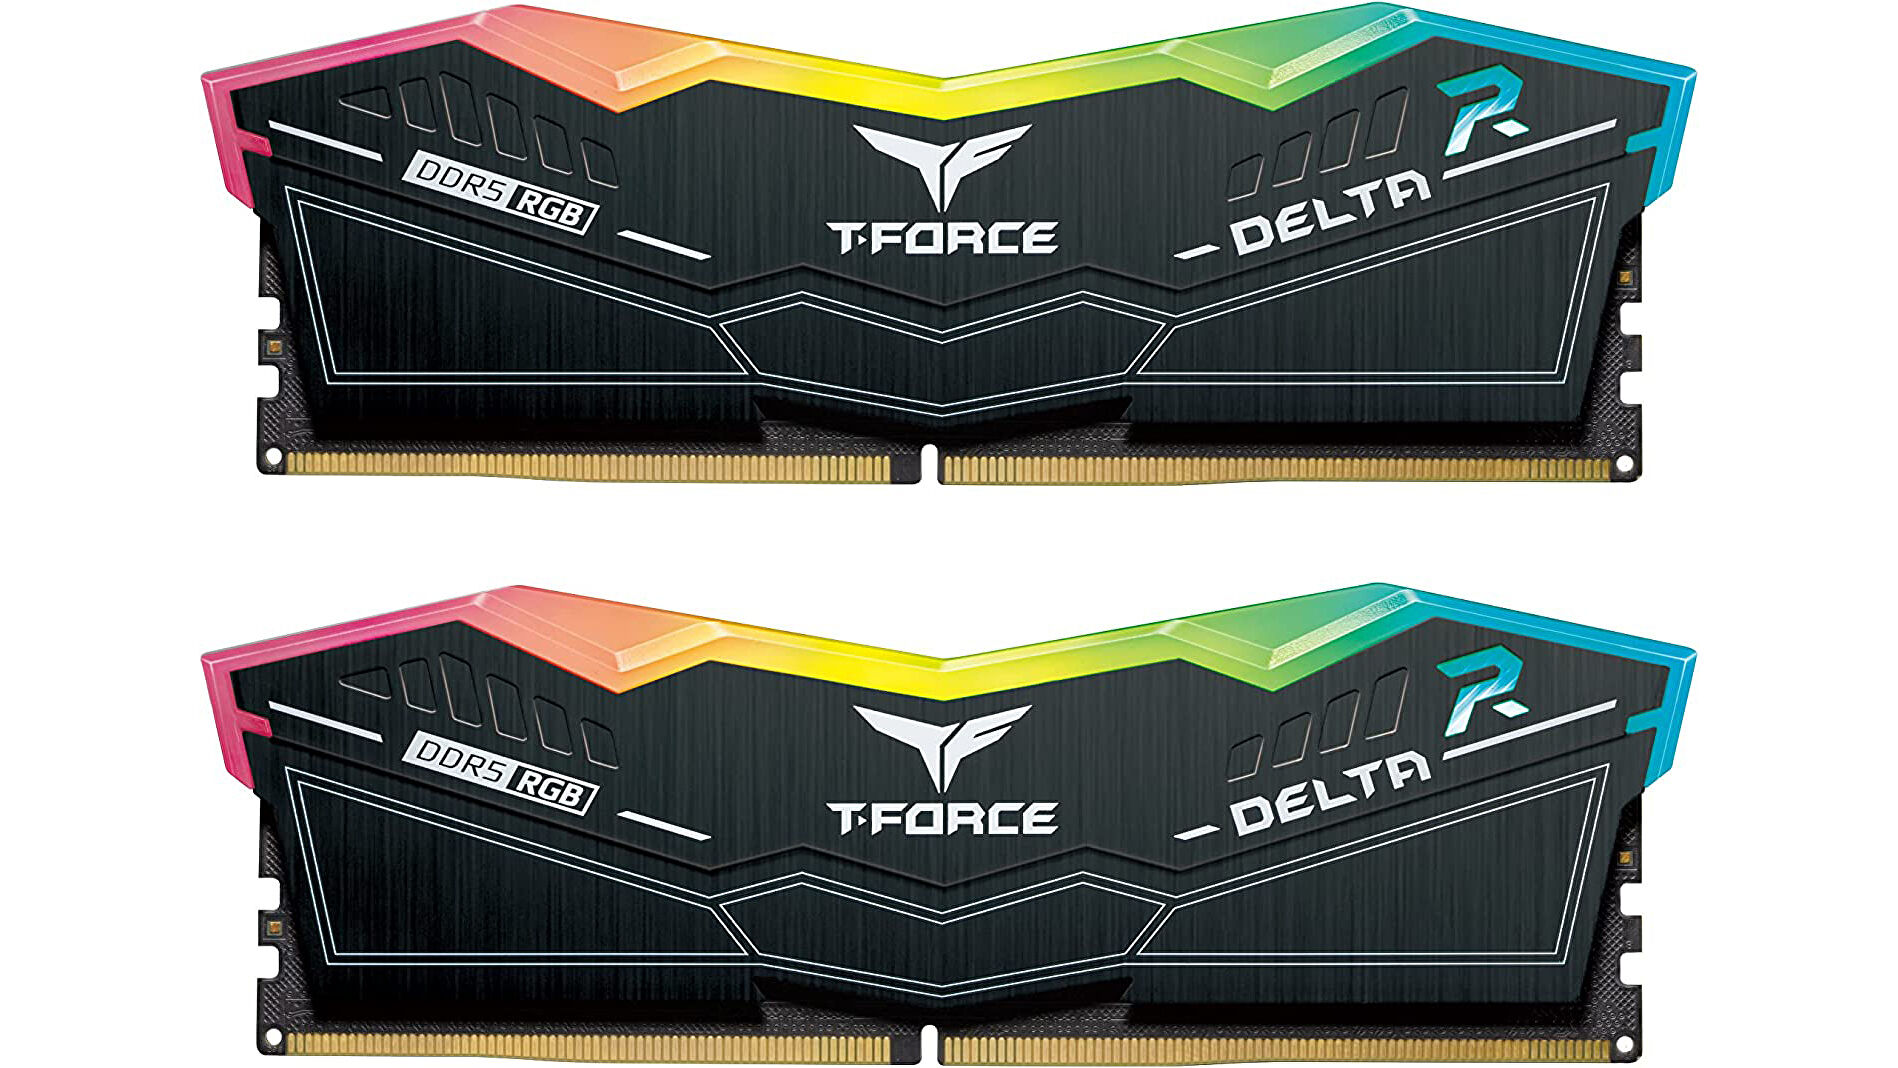 Grab 32GB of DDR5-6000 RAM for $150 after this Newegg discount